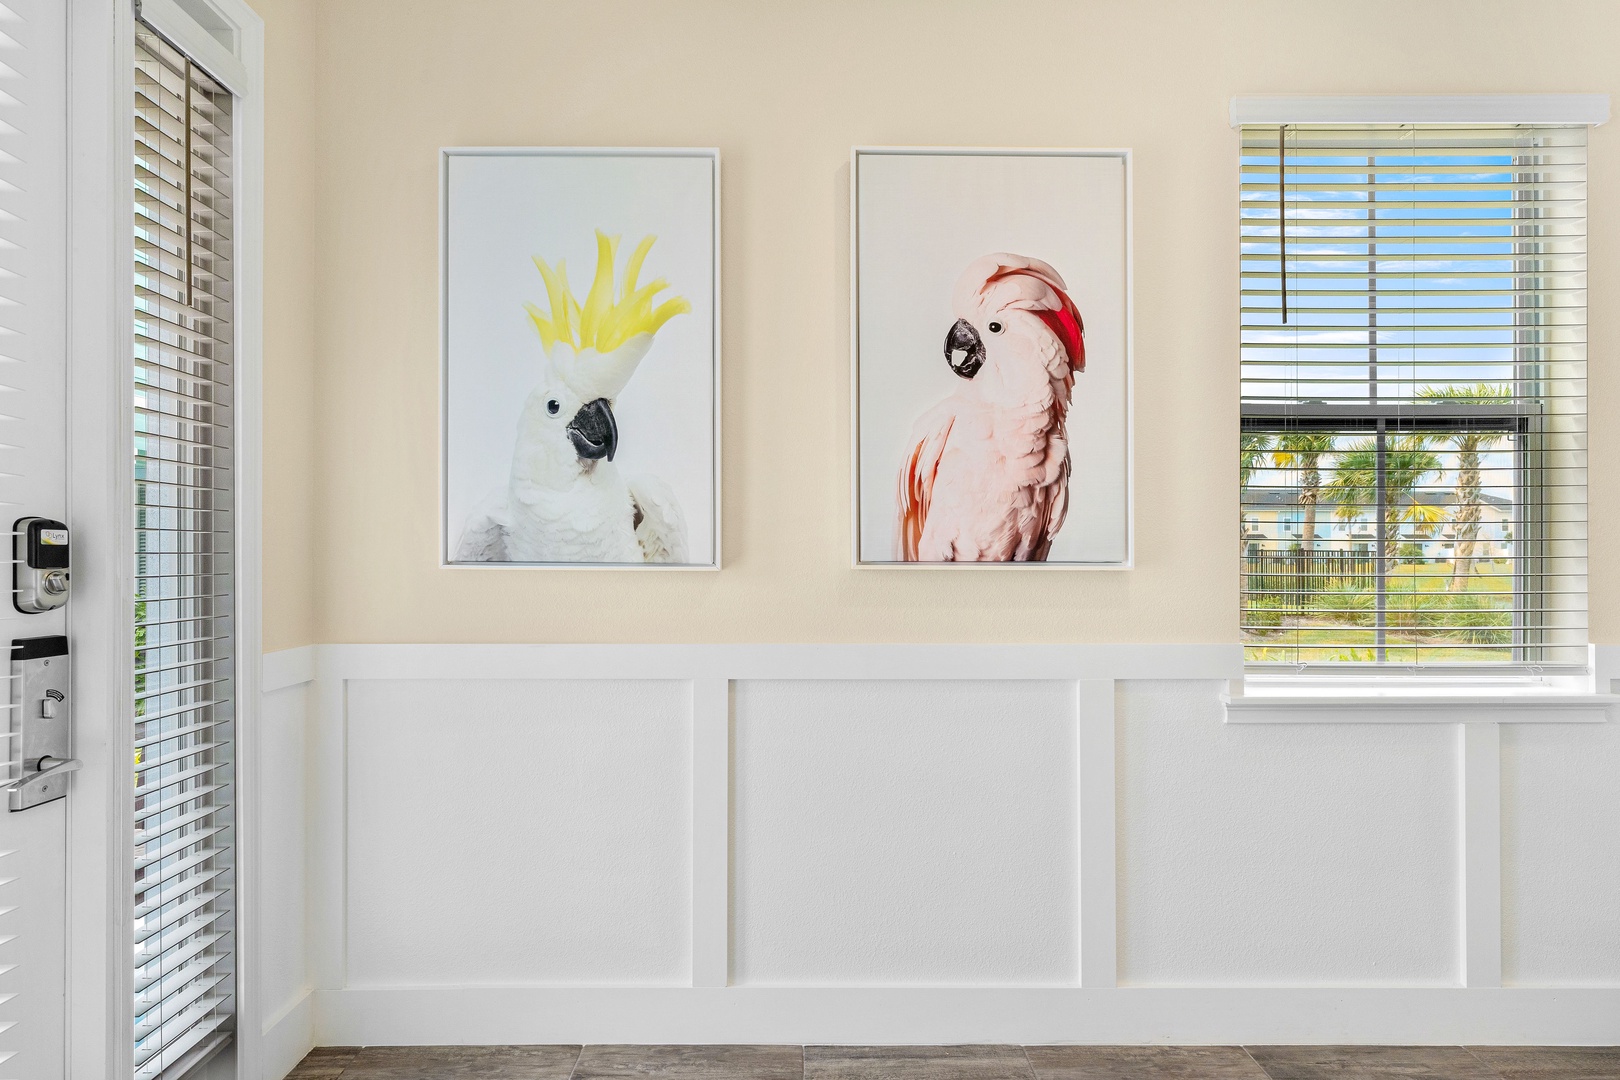 Playful Foyer Featuring Funky Parrots